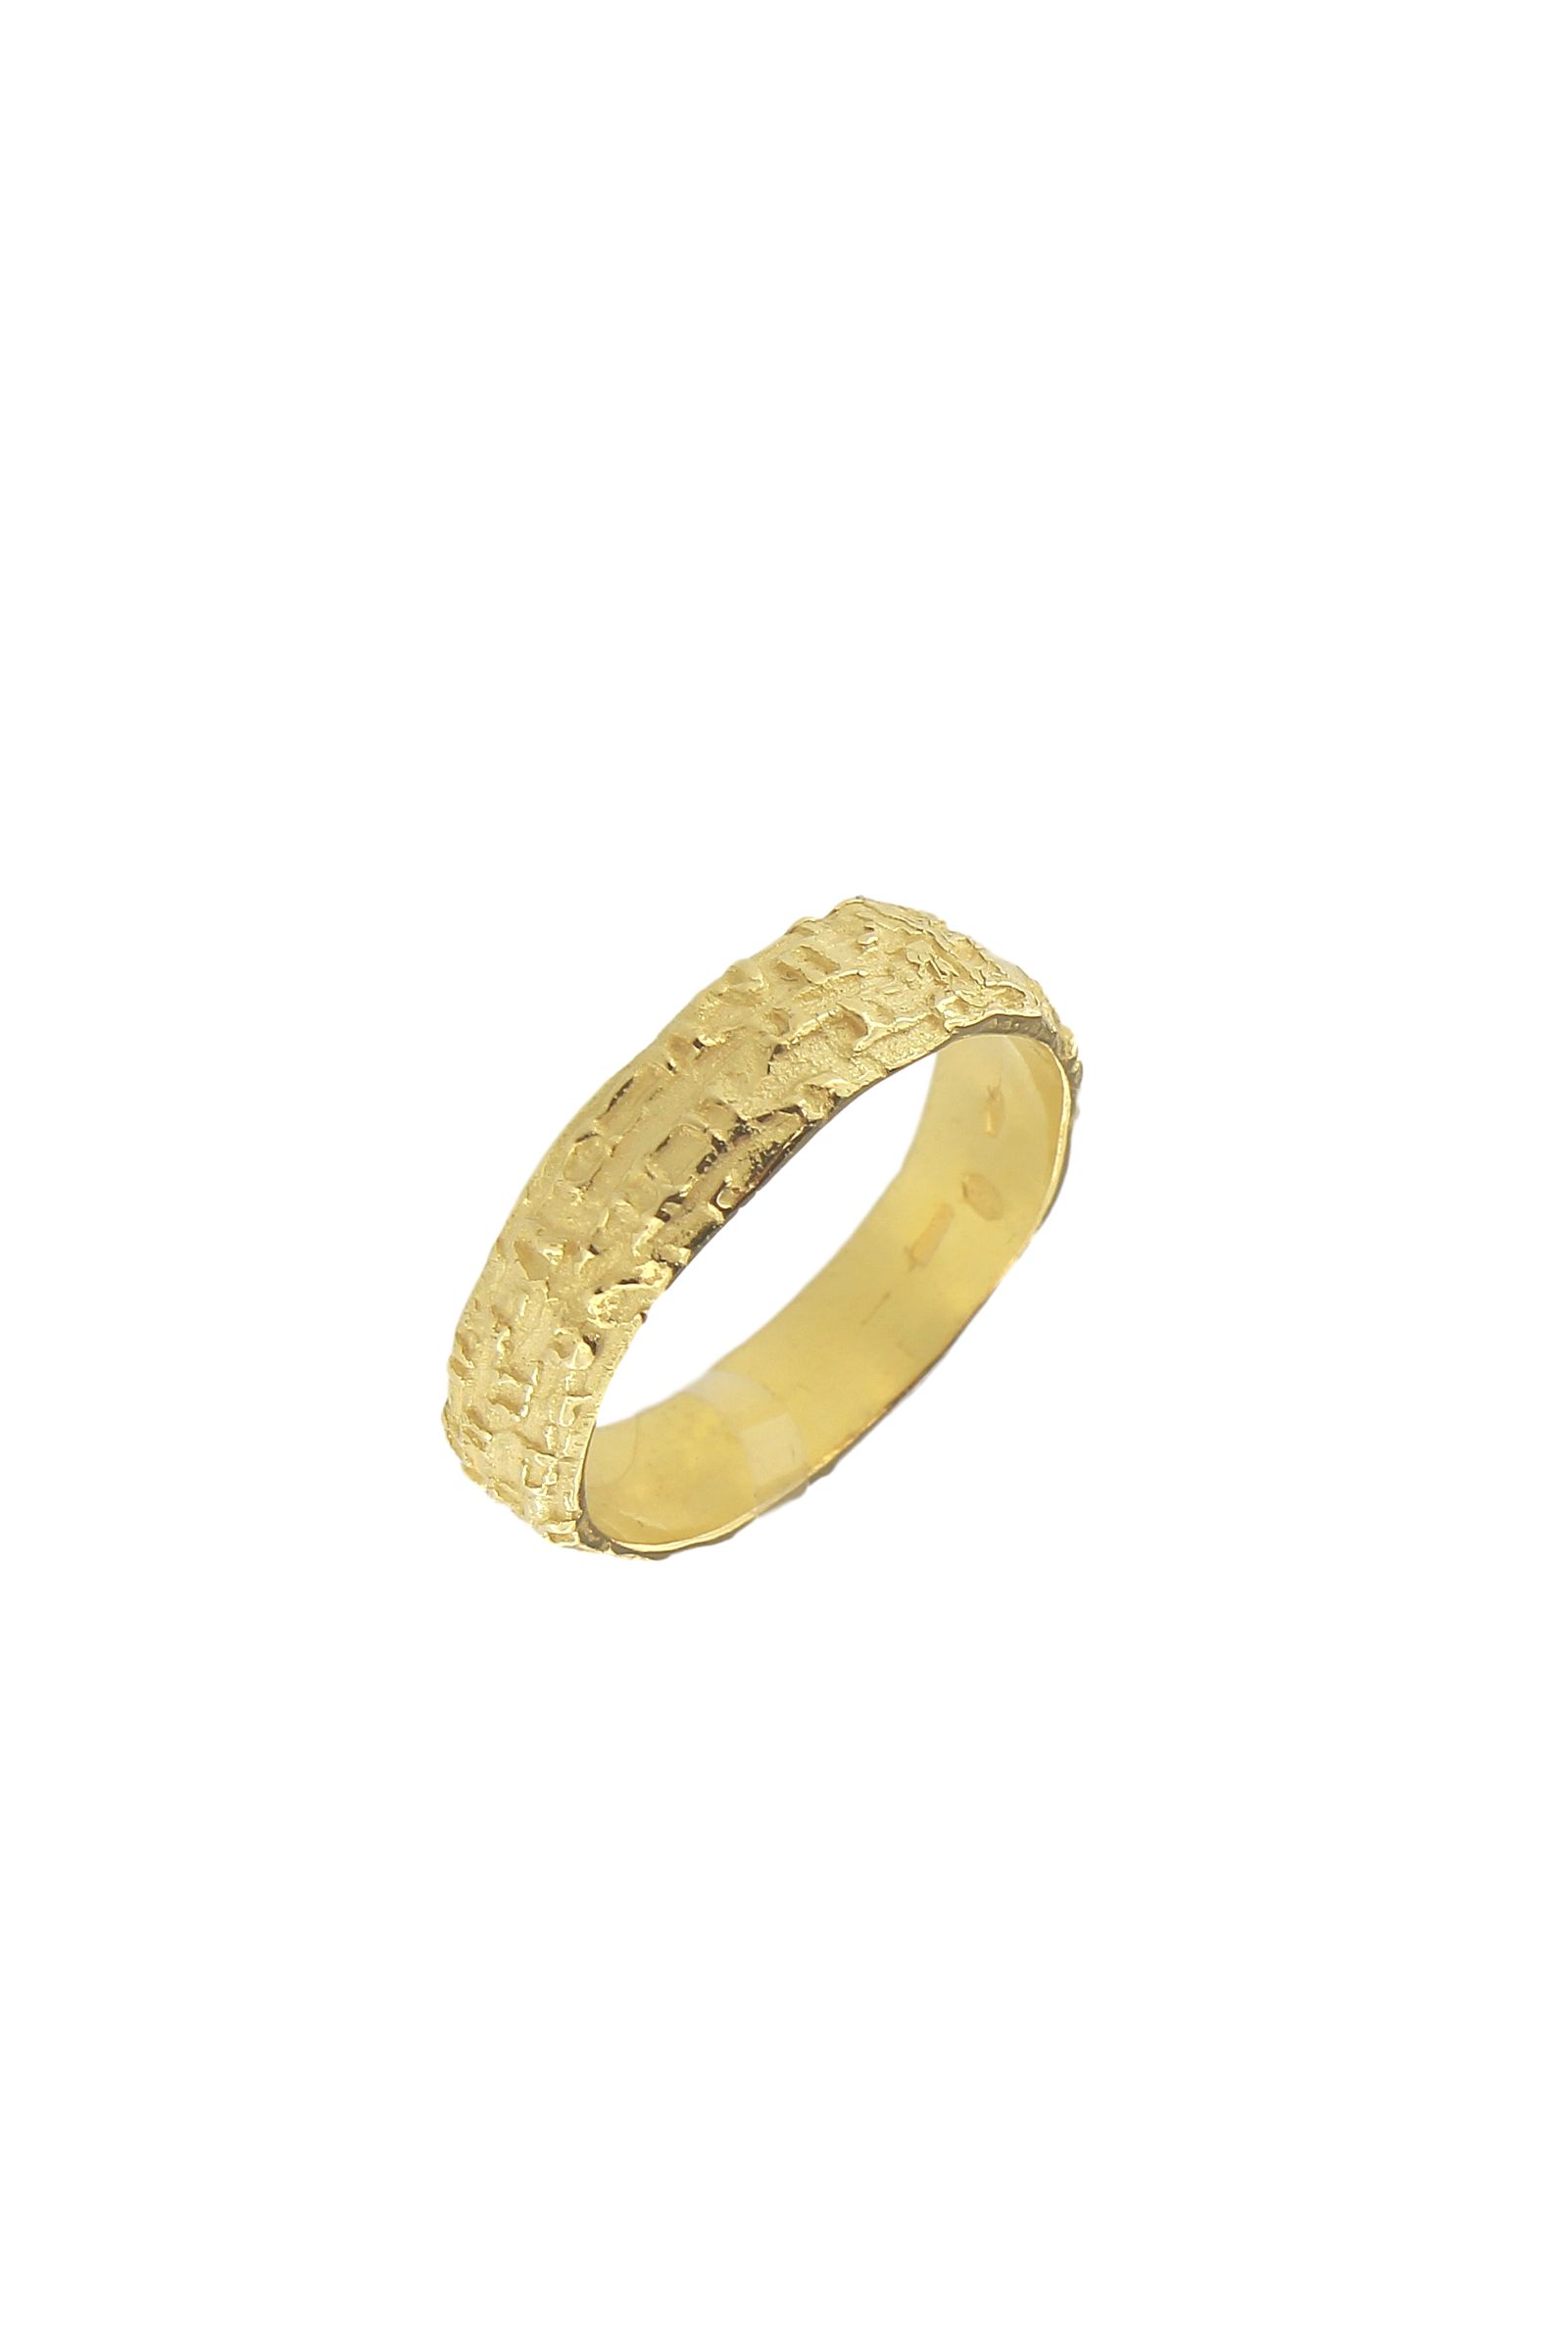 SE47A-18-Kt-Yellow-Gold-Band-Ring-1_